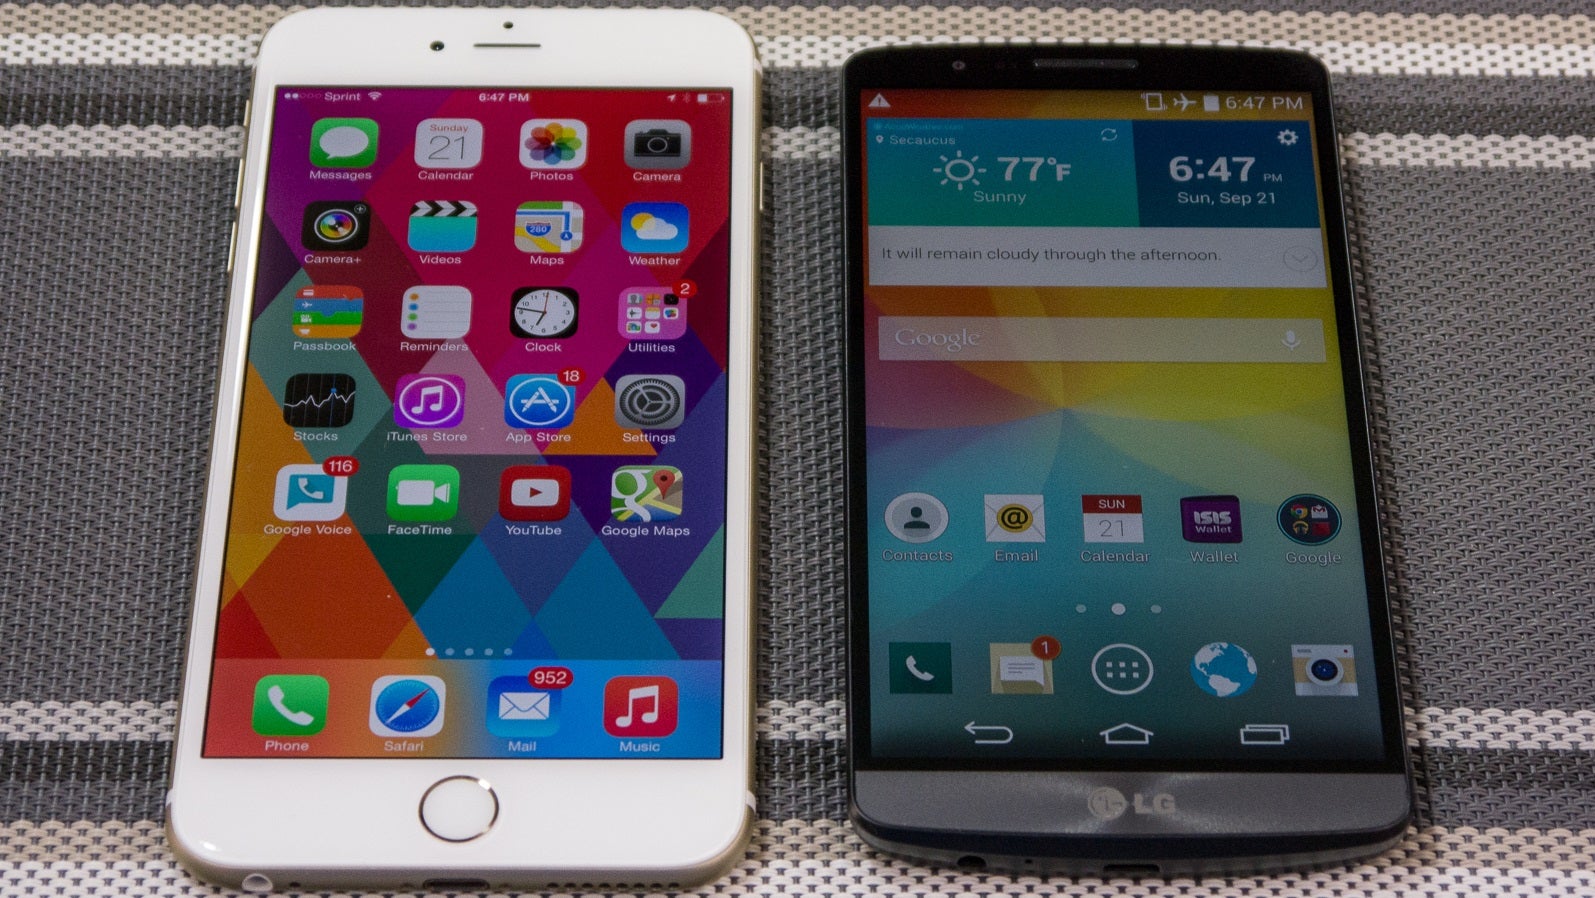 iPhone 6 Plus vs LG G3: vote for the better phone!